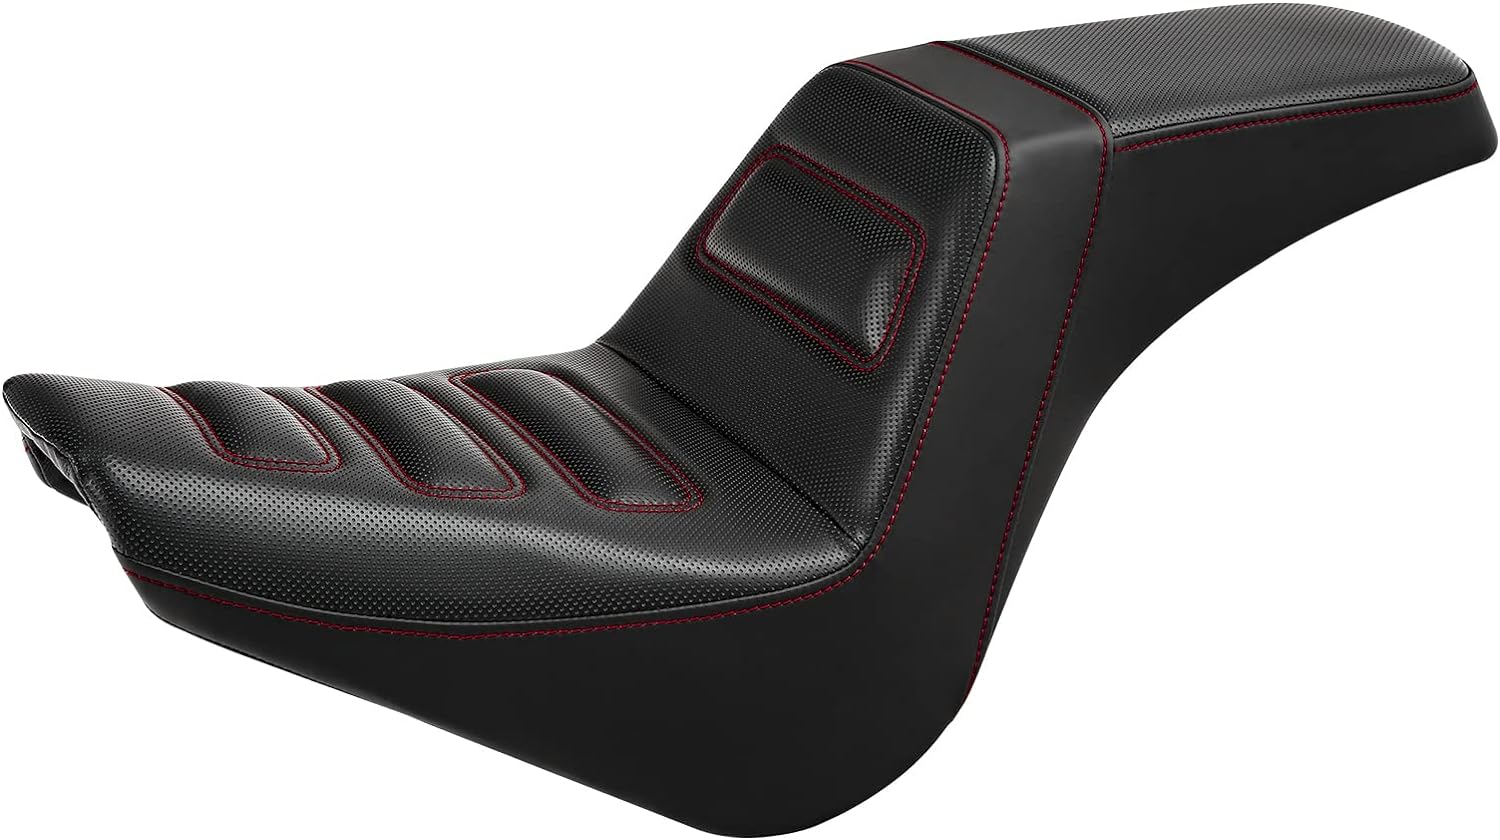 Harley Street Bob FXBB Two-up Seat Review